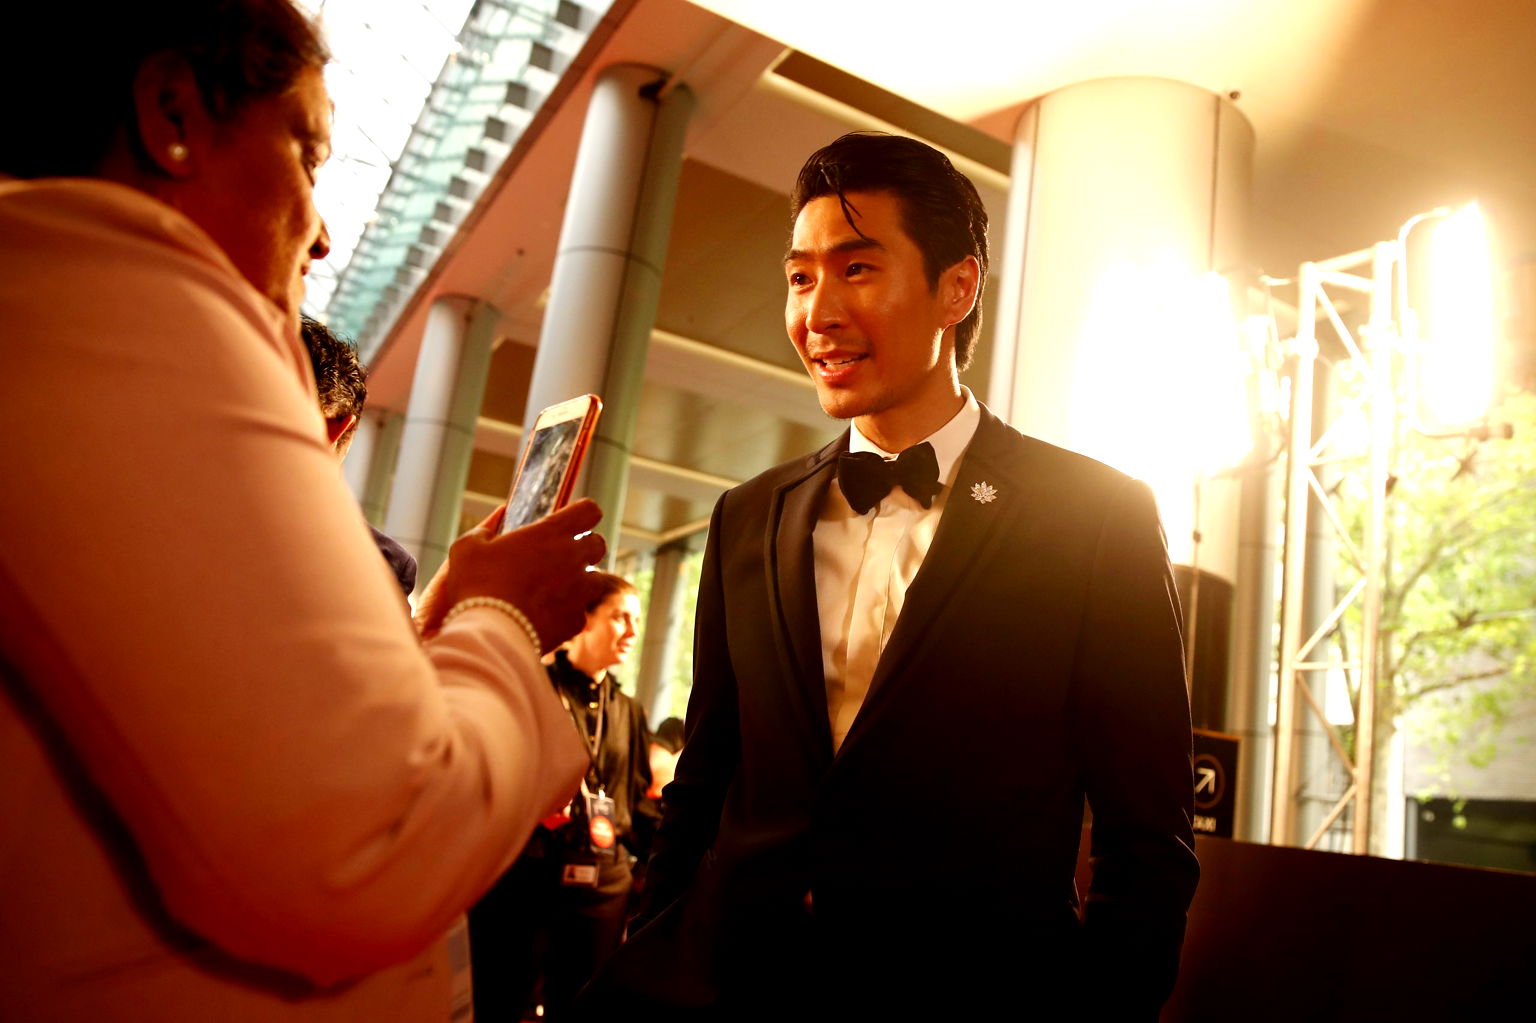 CNET Mistakes ‘Crazy Rich Asians’ Actor Chris Pang for Simu Liu in Embarrassing Mix Up